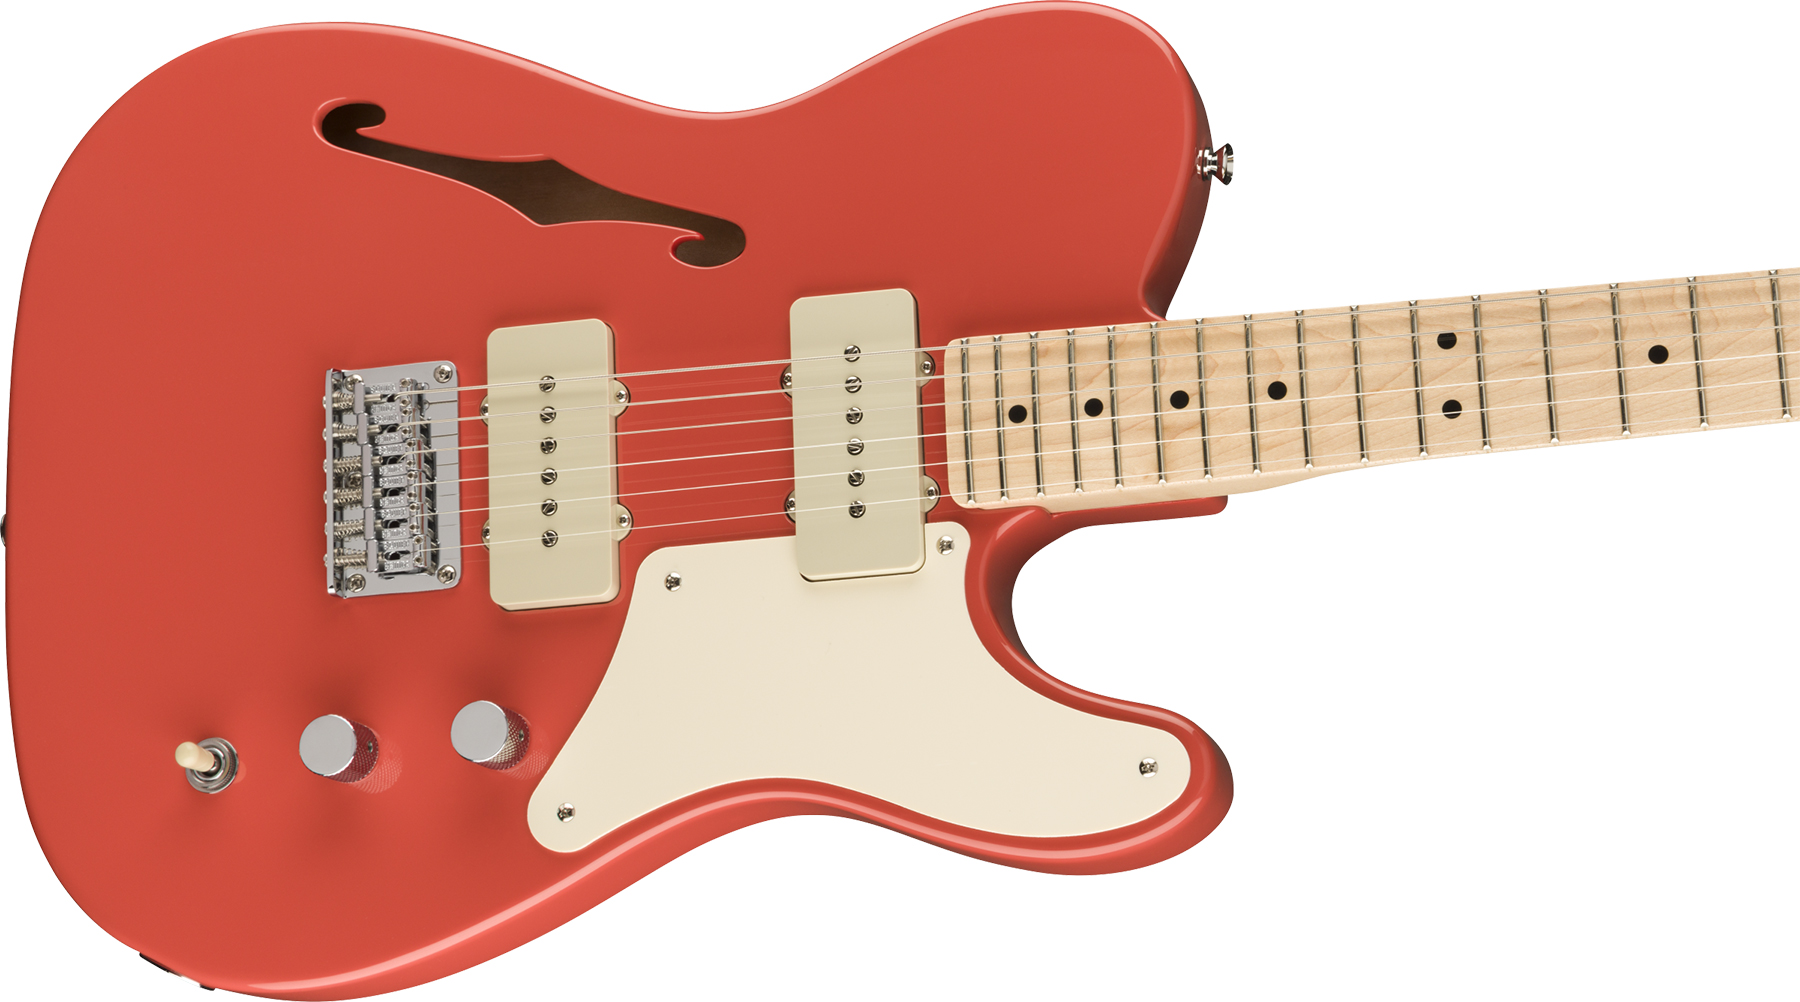 Squier Tele Thinline Cabronita Paranormal Ss Ht Mn - Fiesta Red - Guitare Électrique 1/2 Caisse - Variation 2